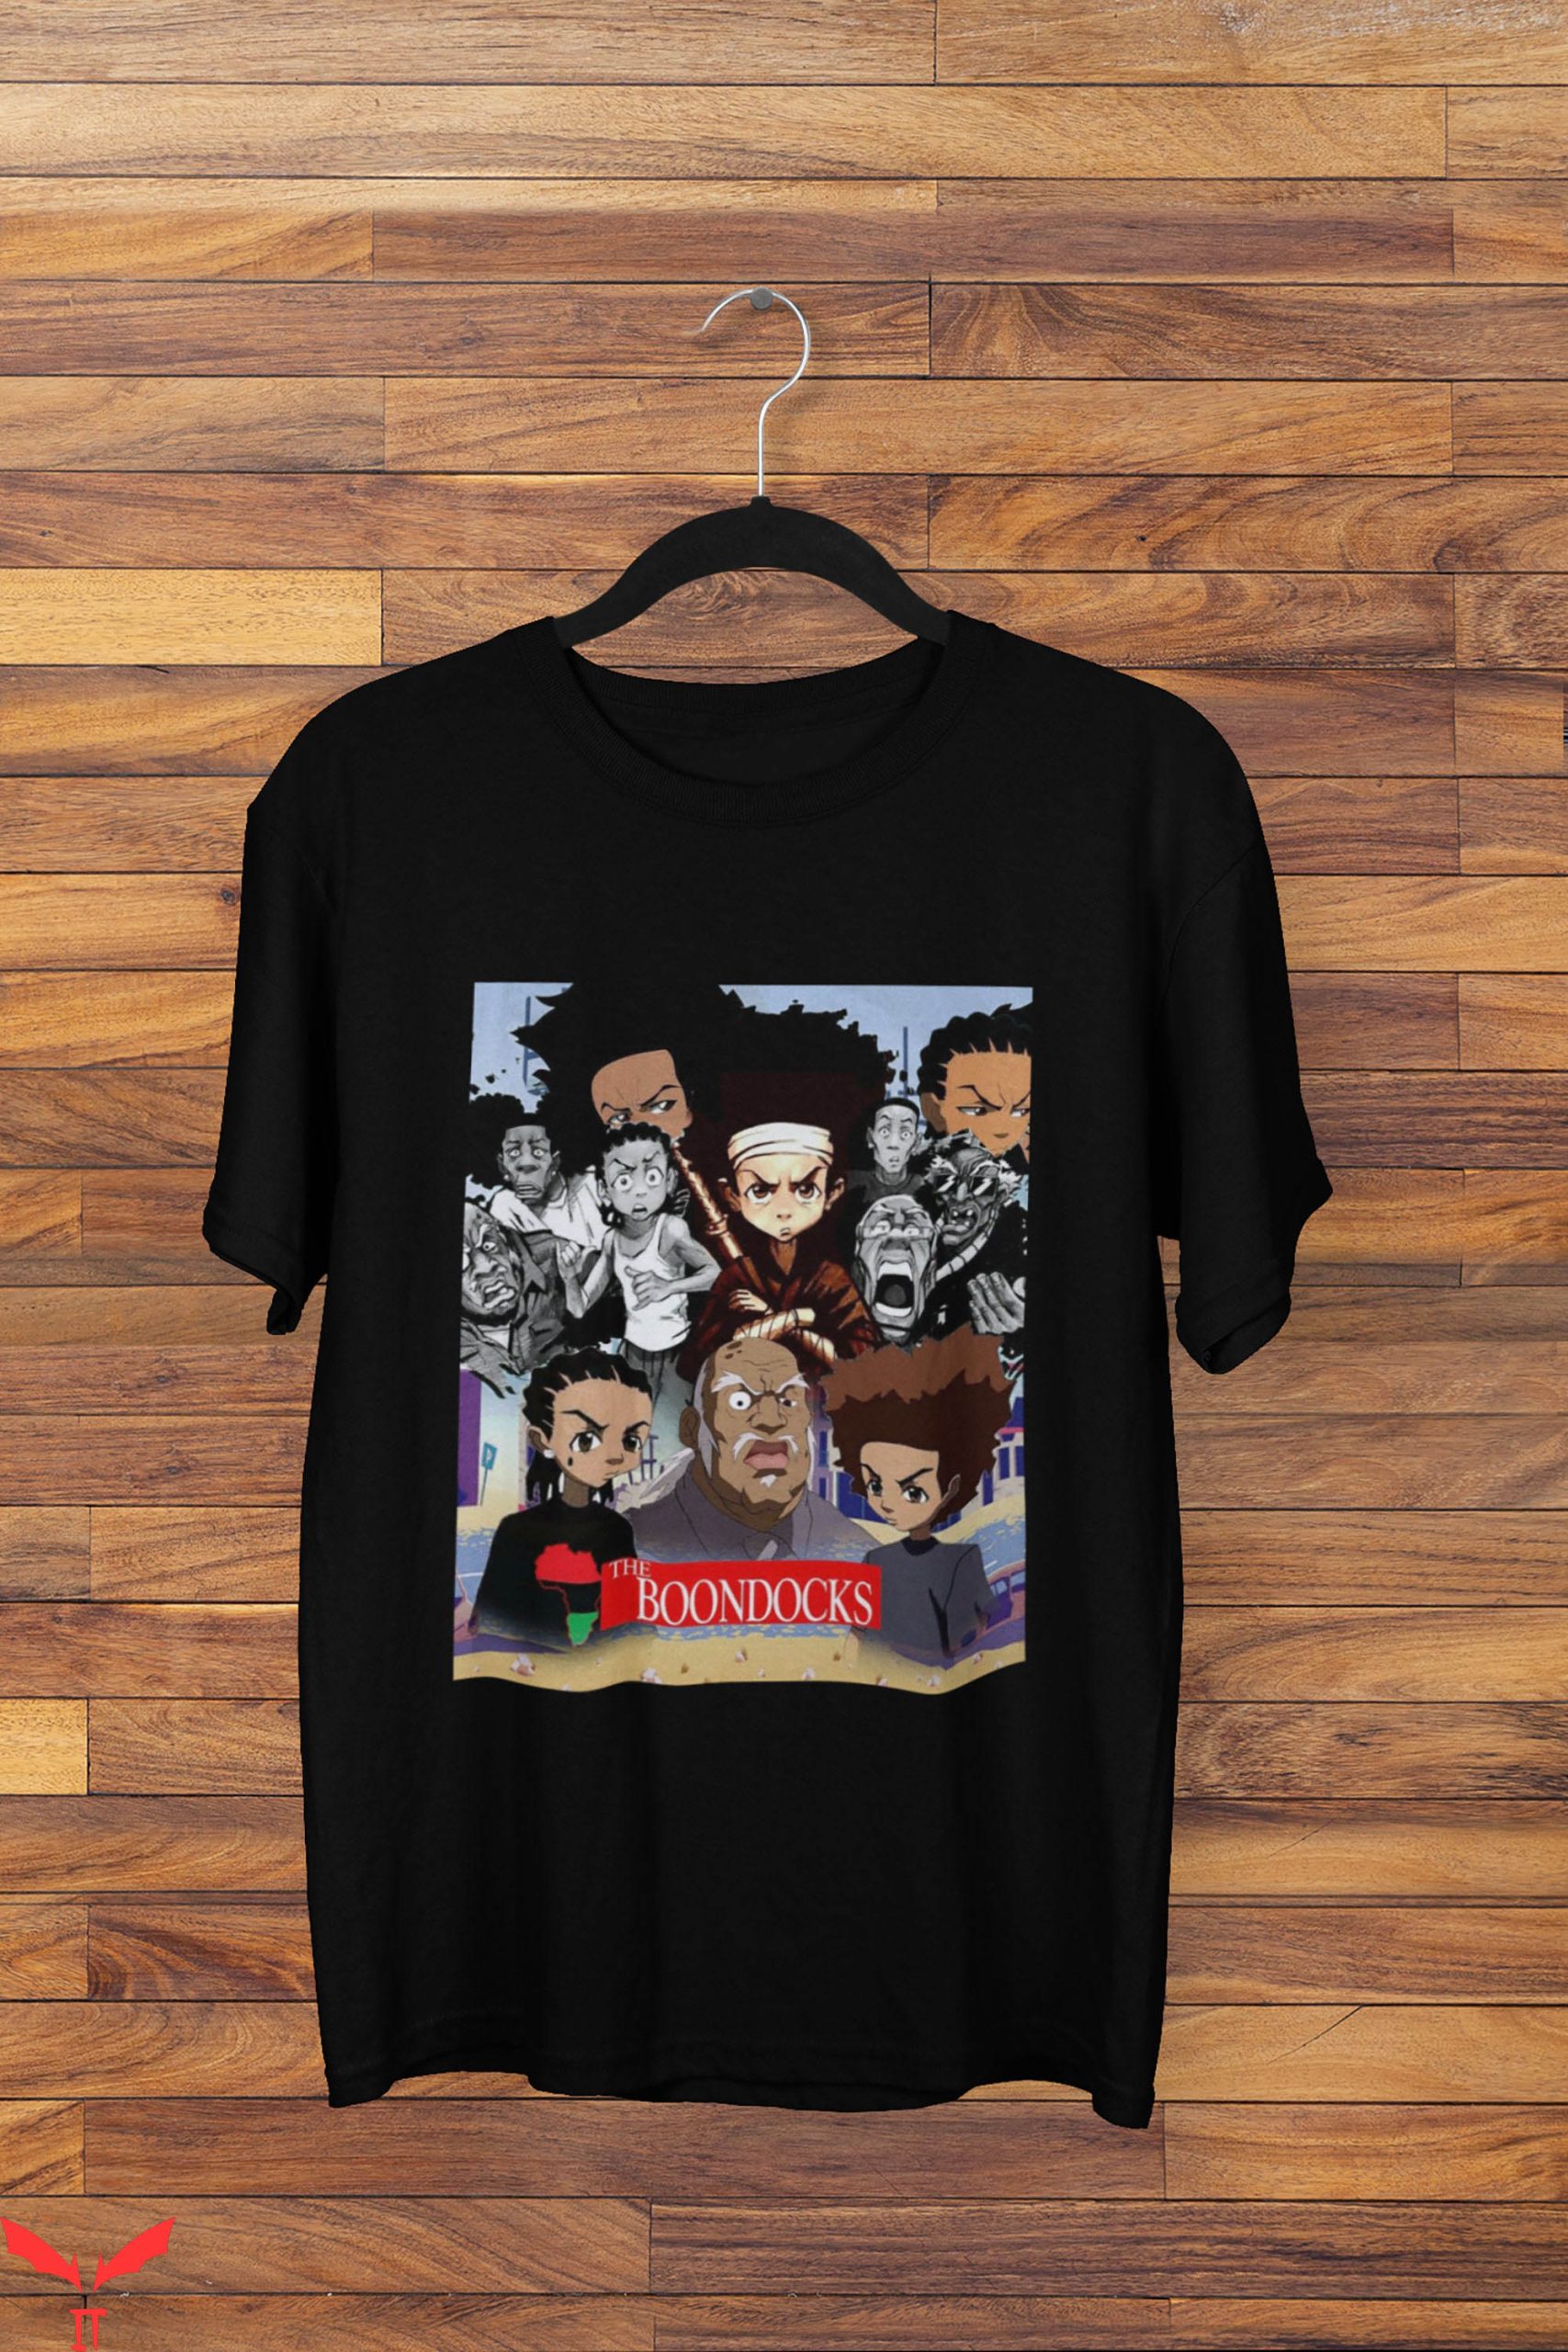 The Boondocks T-Shirt Uncle Ruckus Cartoon Funny Style